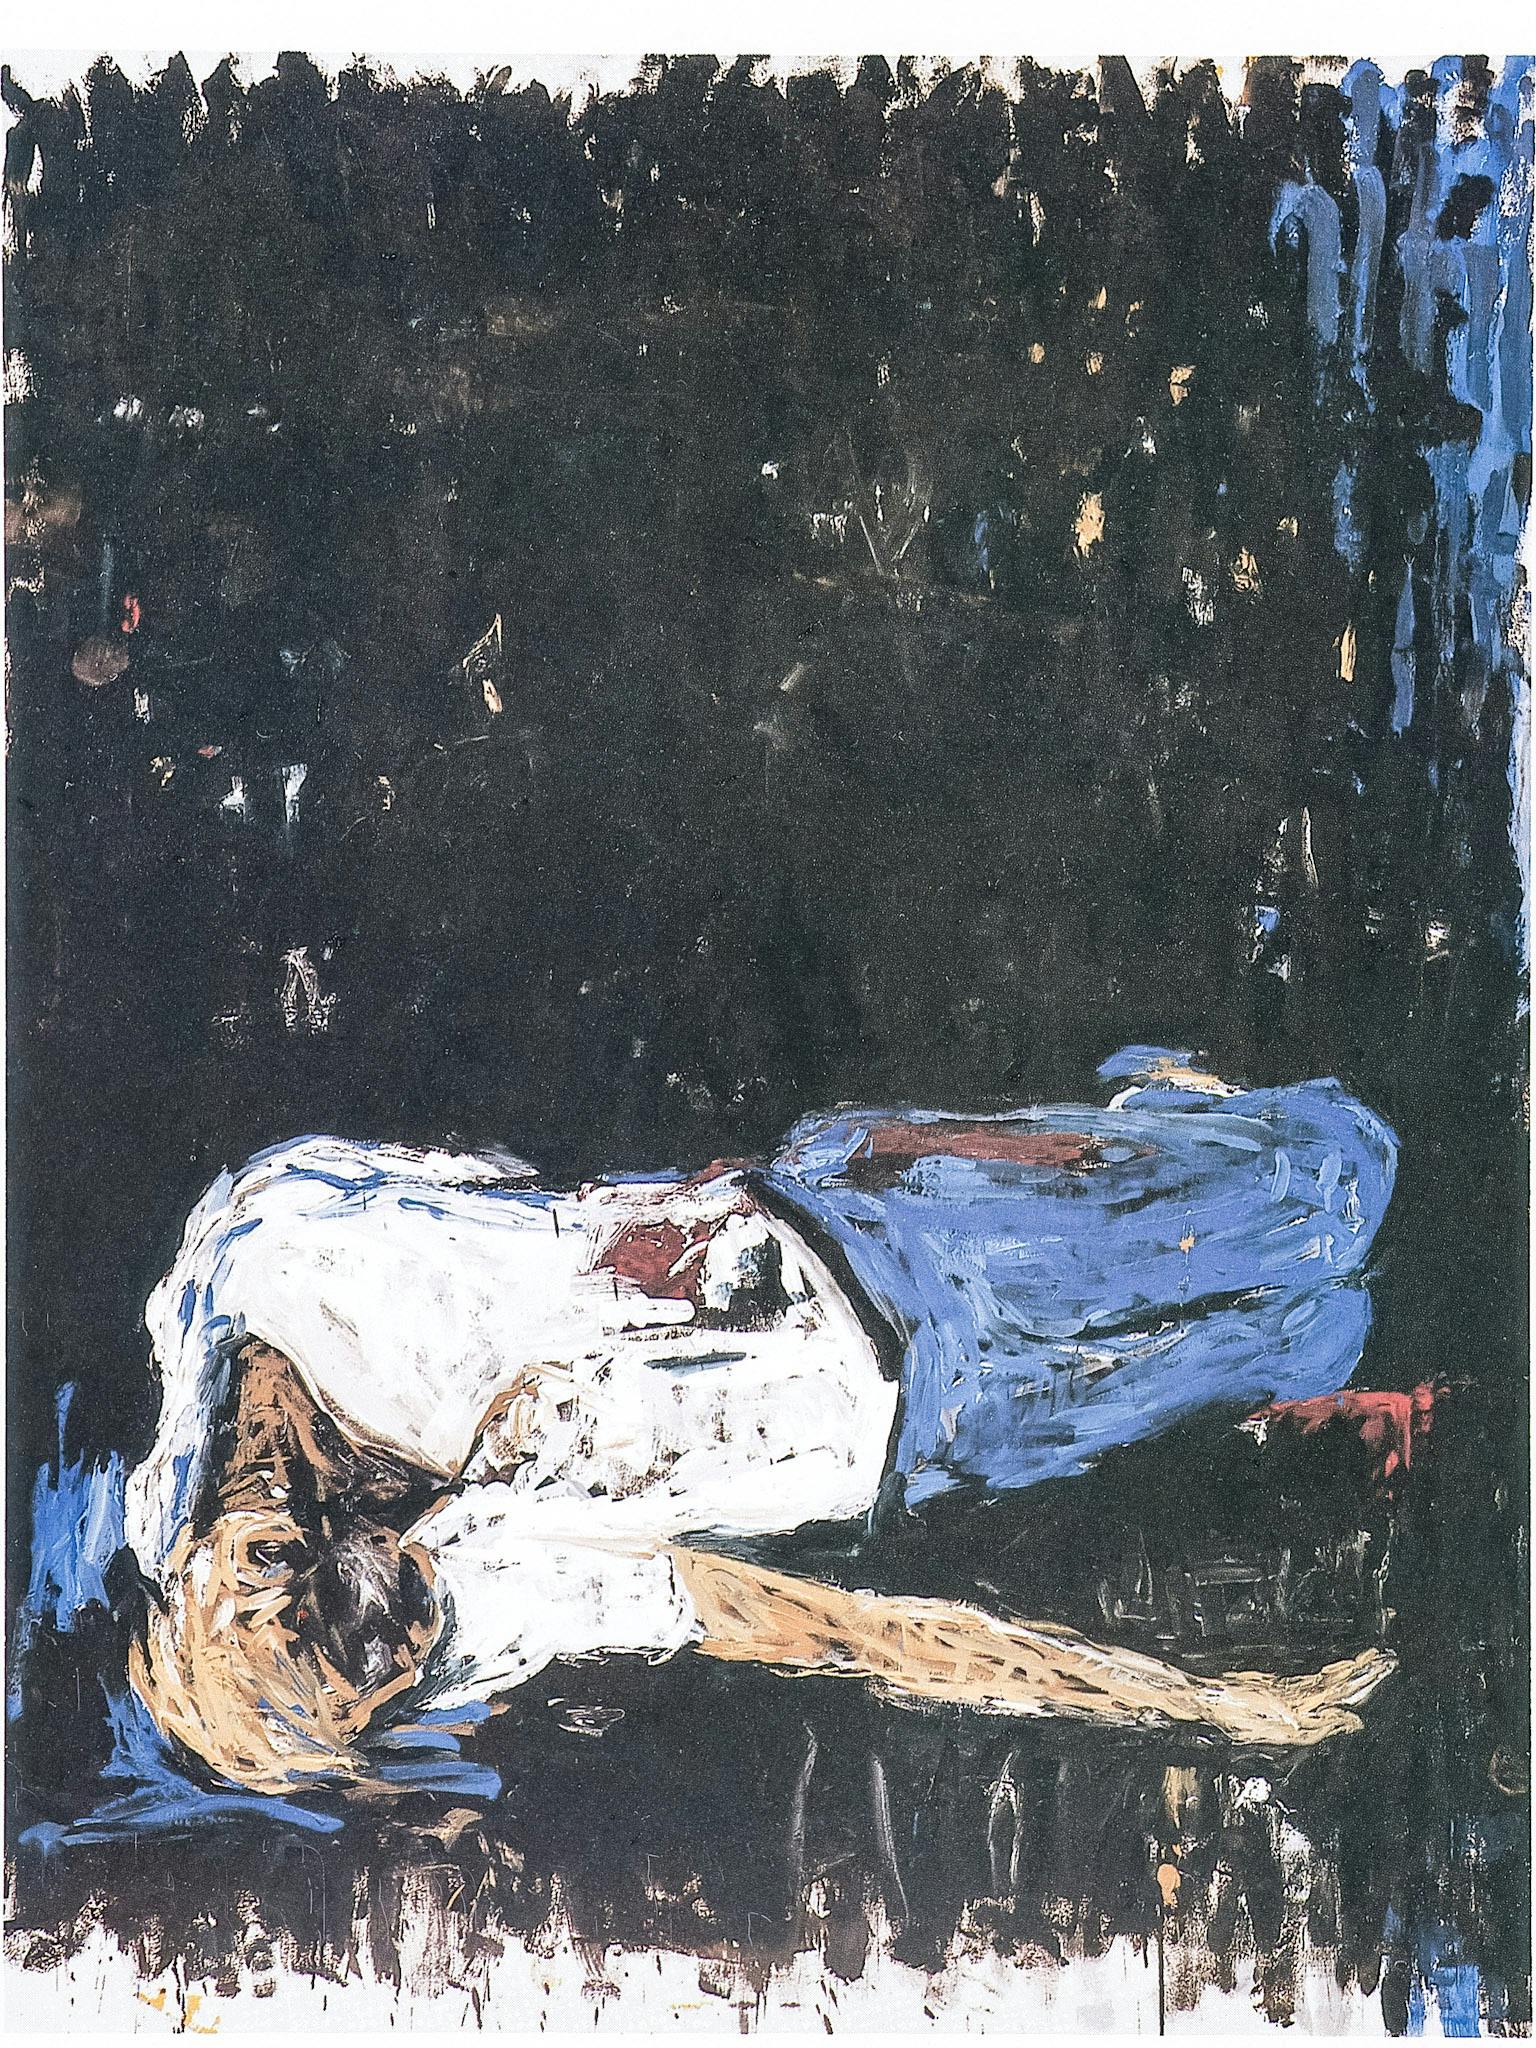 A dark painting with expressive brushstrokes showing a person laying down on their side. Their white shirt and blue pants have large red splotches on them, and the background is mostly black.